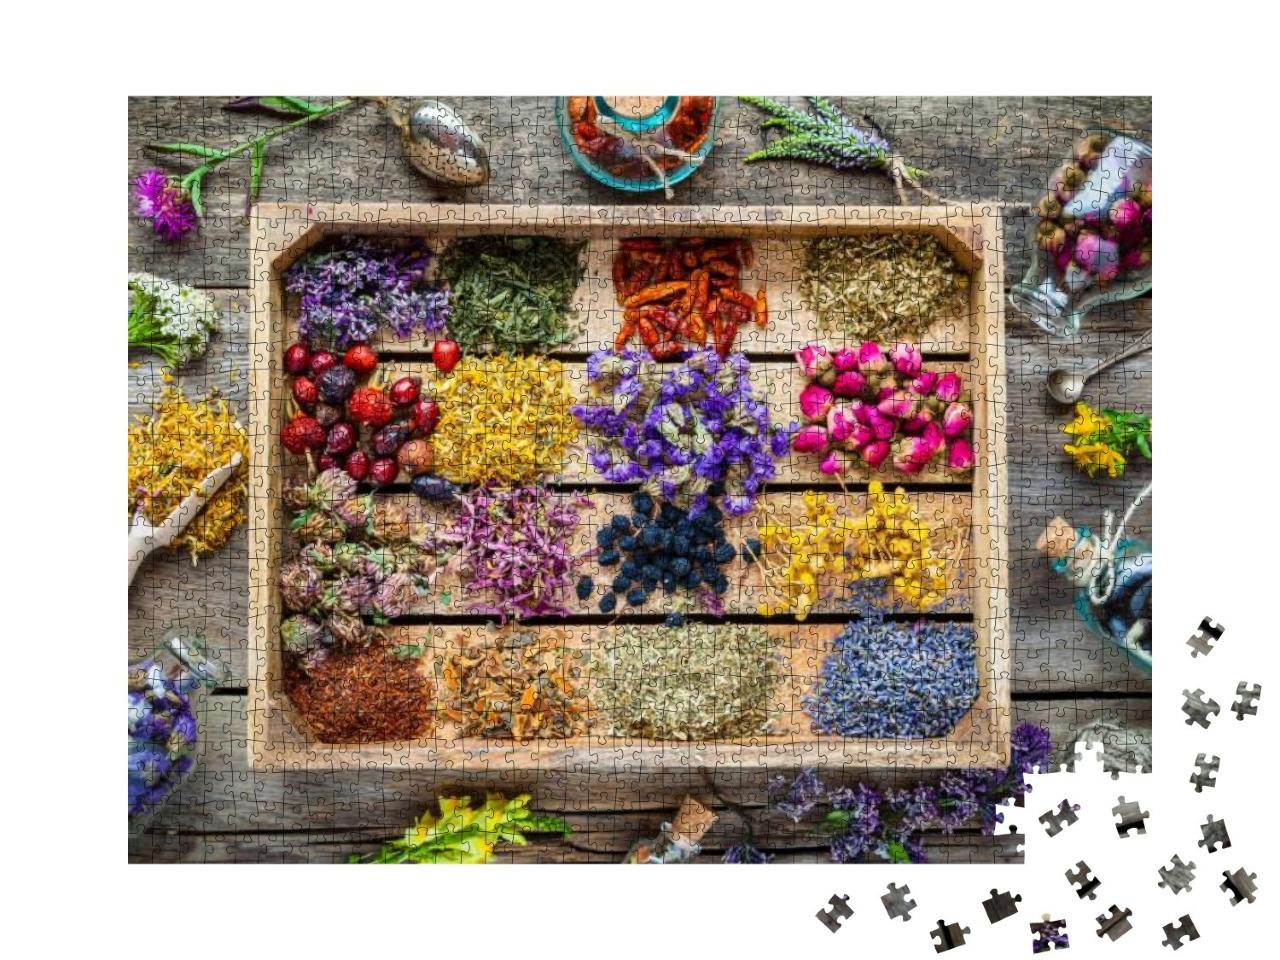 Healing Herbs in Wooden Box on Table, Herbal Medicine, To... Jigsaw Puzzle with 1000 pieces